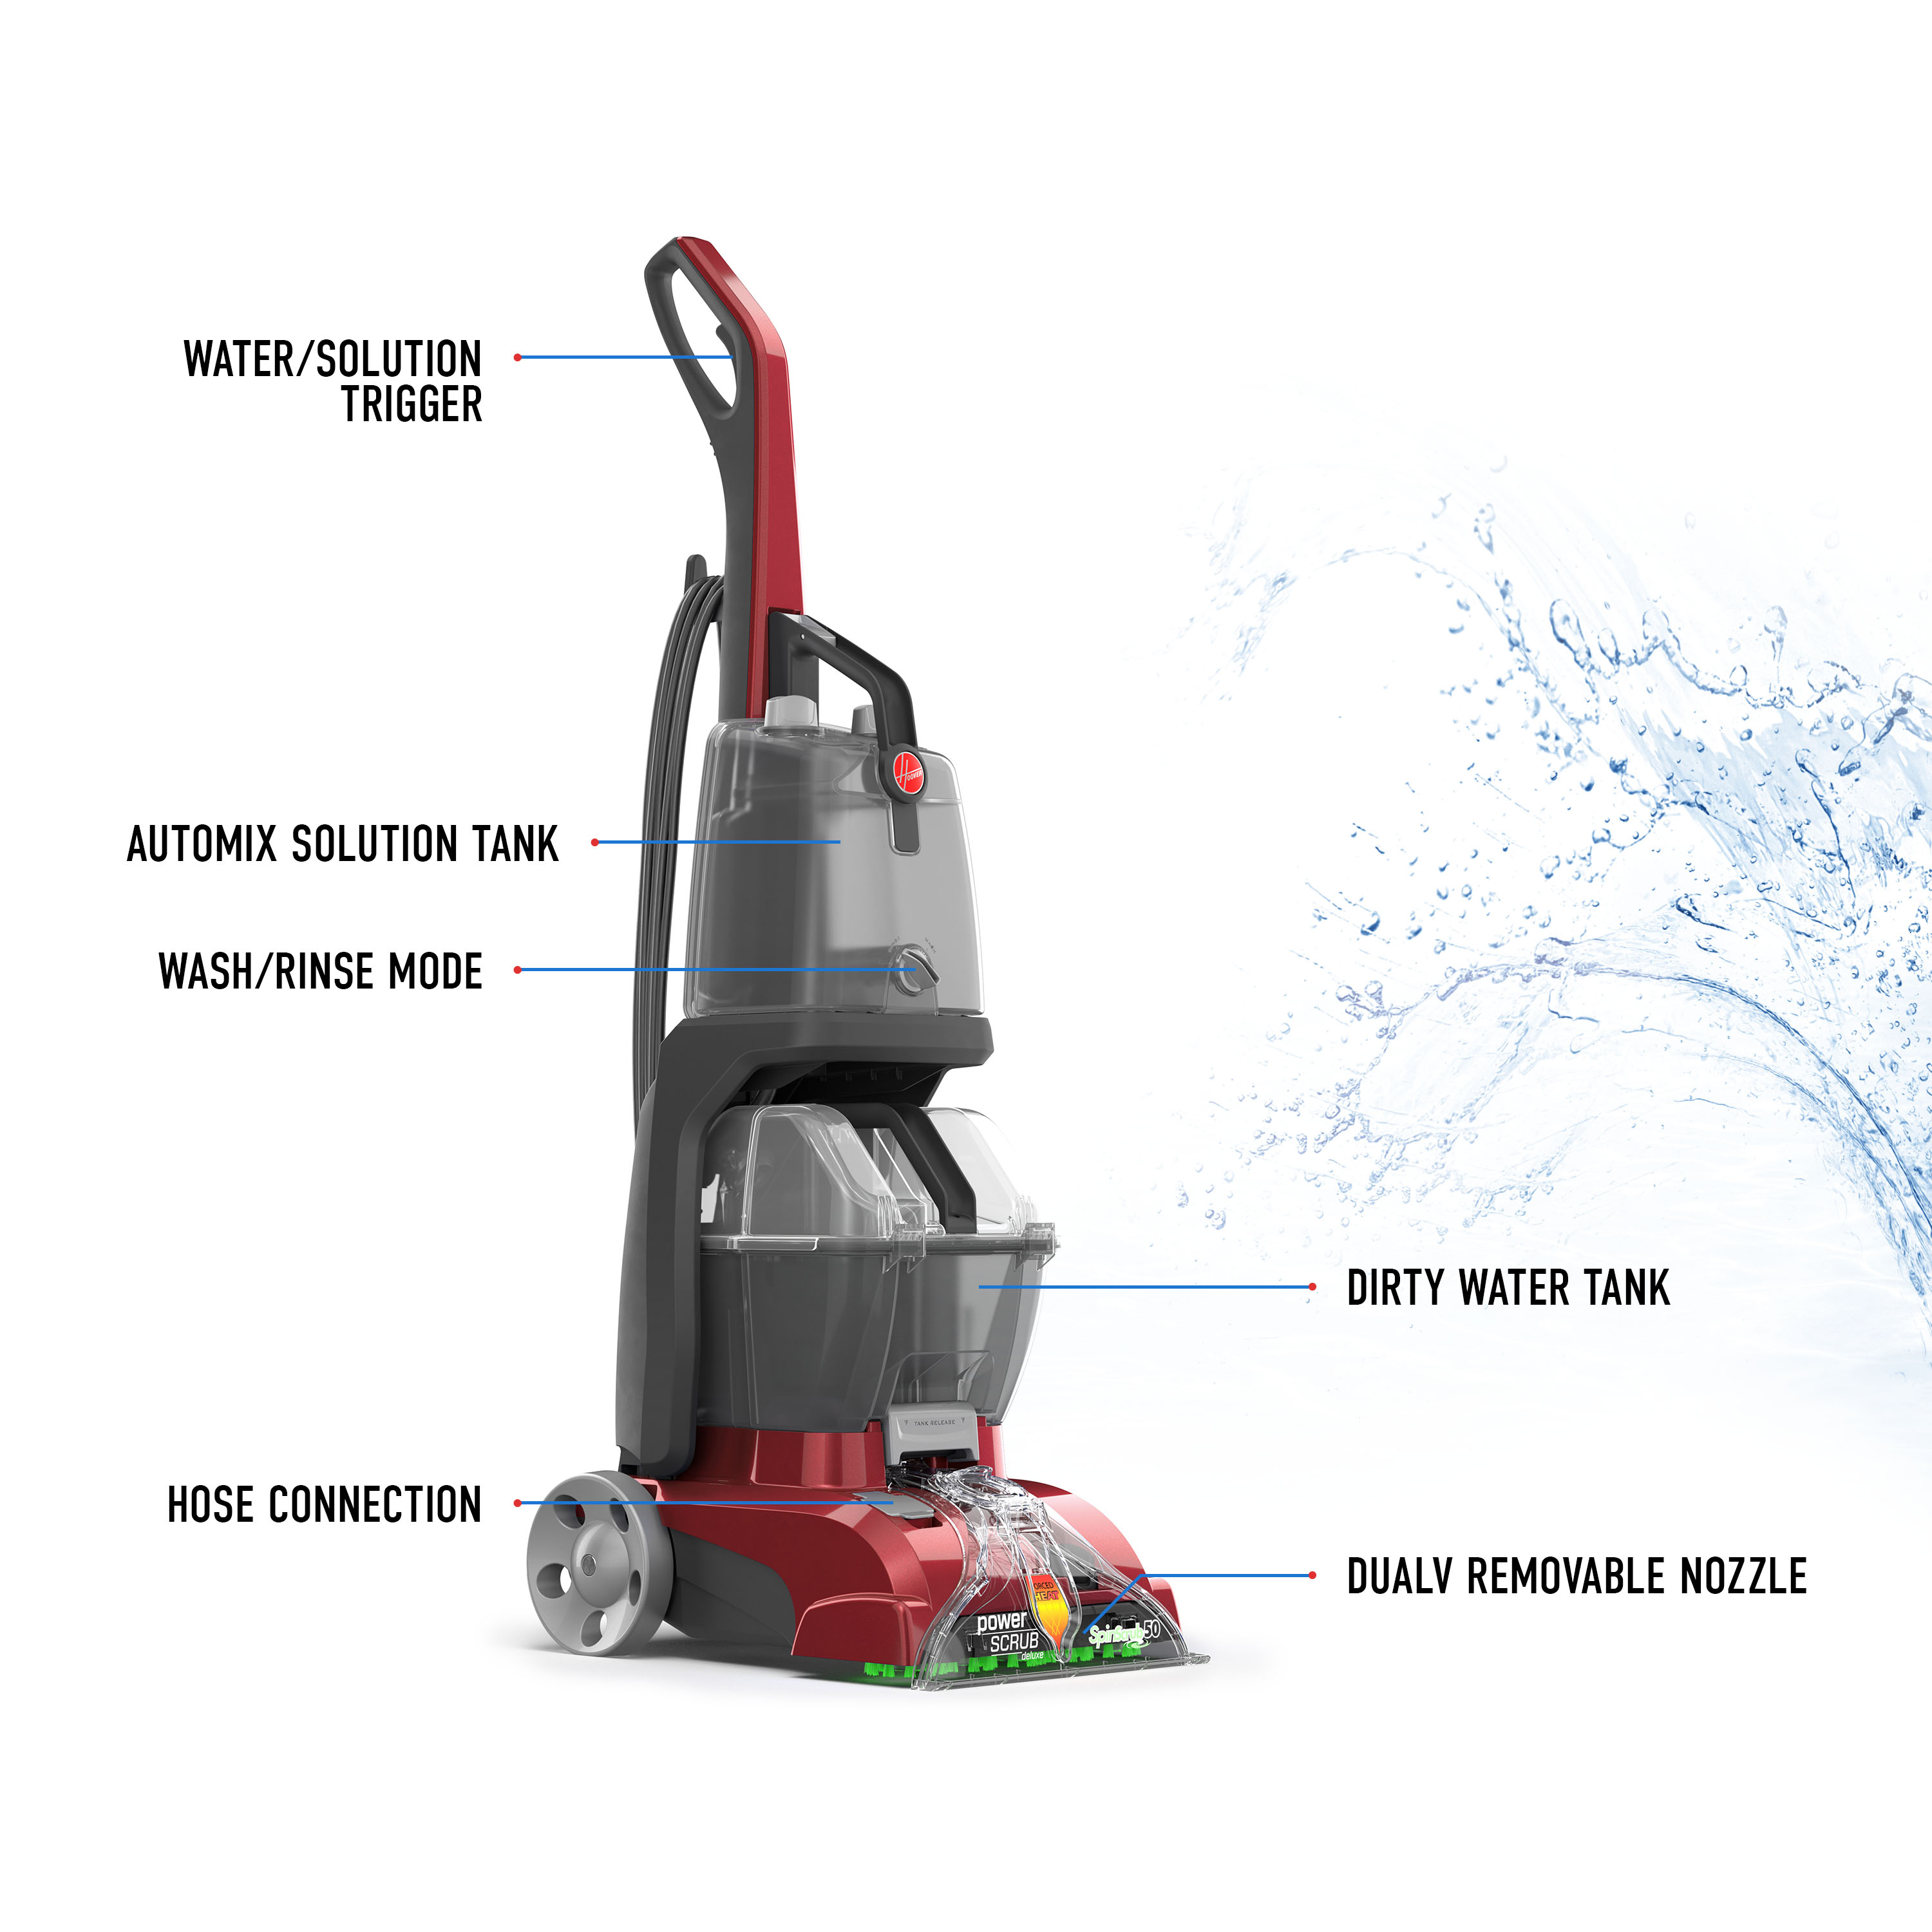 Hoover PowerScrub Carpet Cleaner with SpinScrub Technology, FH50135 - image 4 of 14